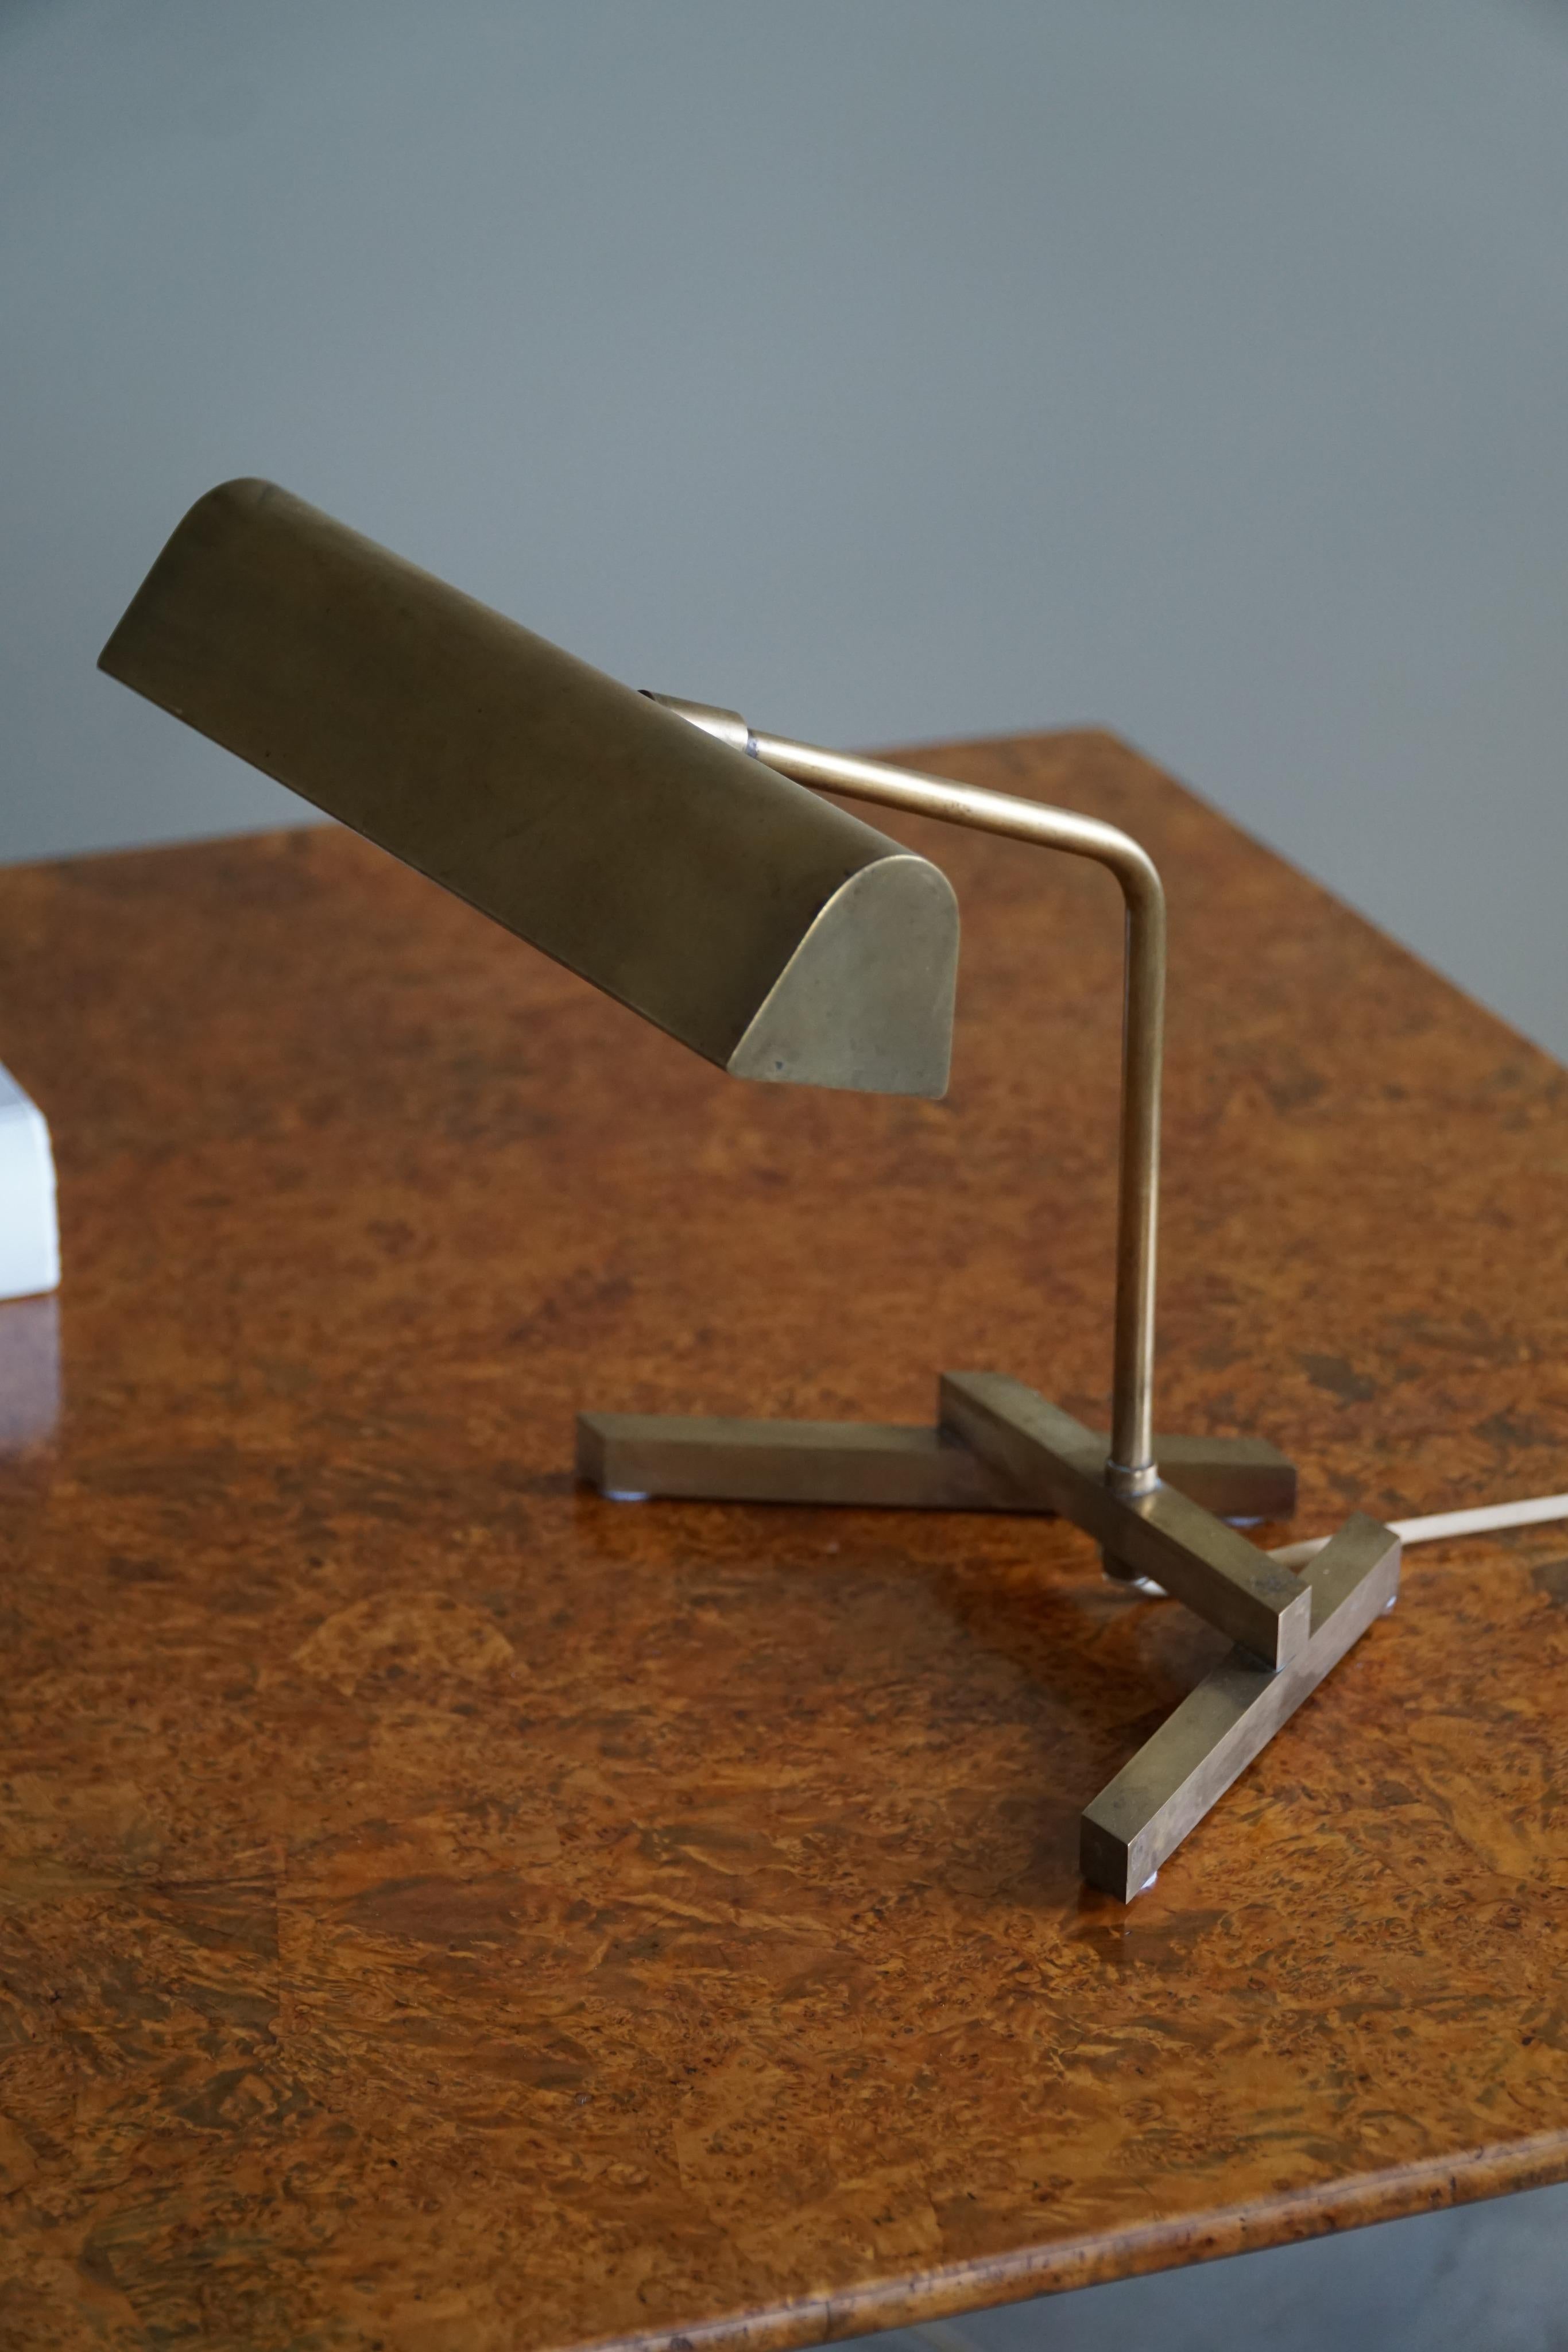 Danish Mid Century Modern, Geometric Table Lamp in Brass from the 1950s For Sale 3